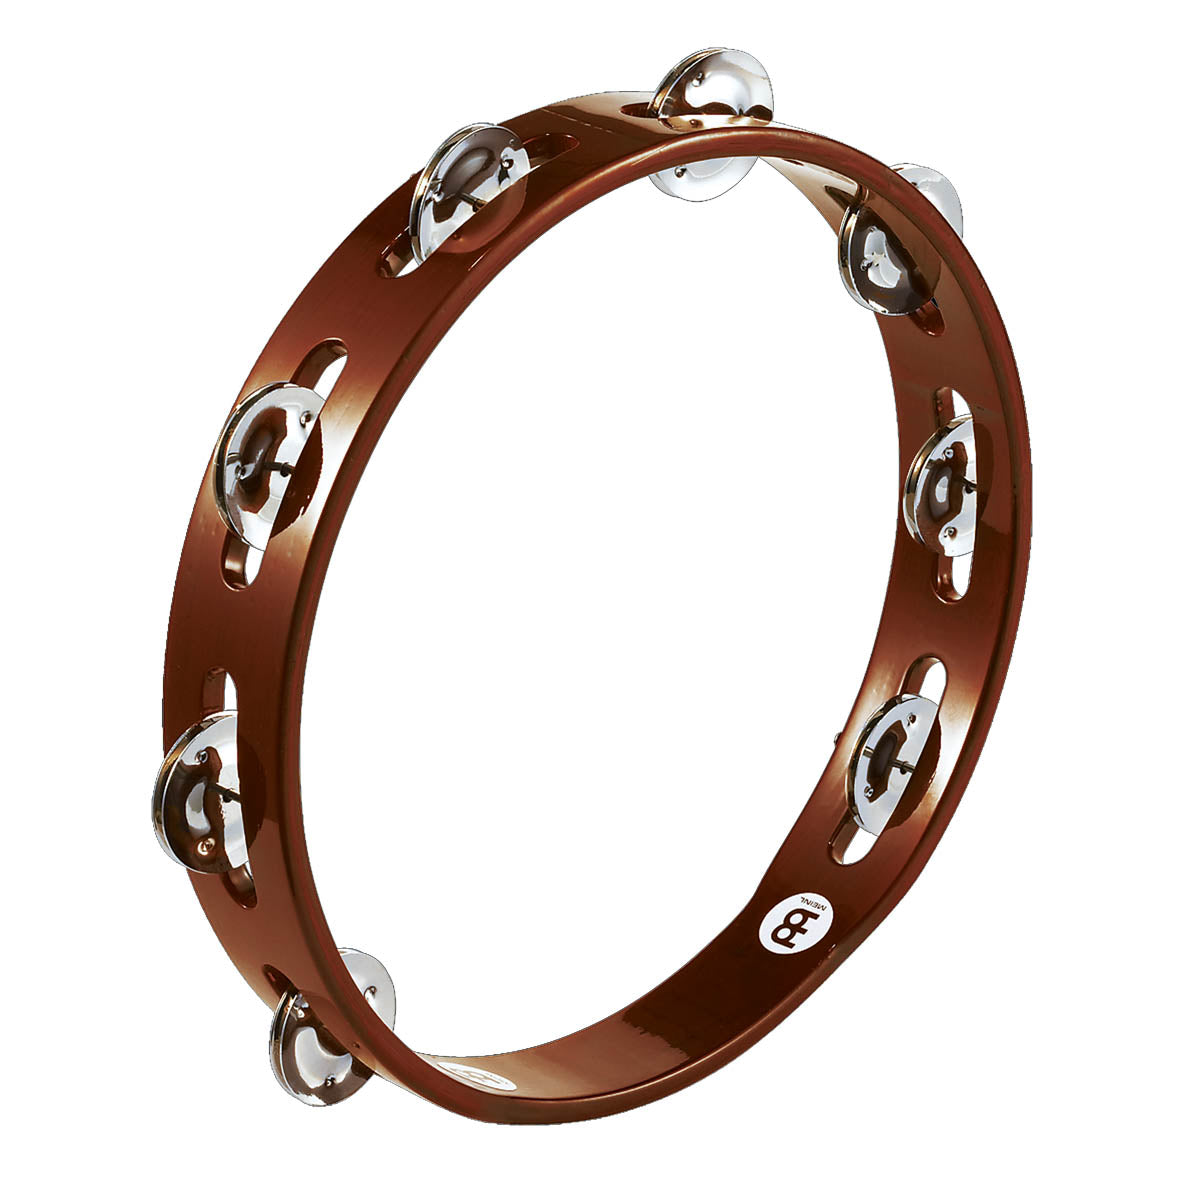 Meinl Traditional 10" Wood Tambourine in Antique Brown - Single Row